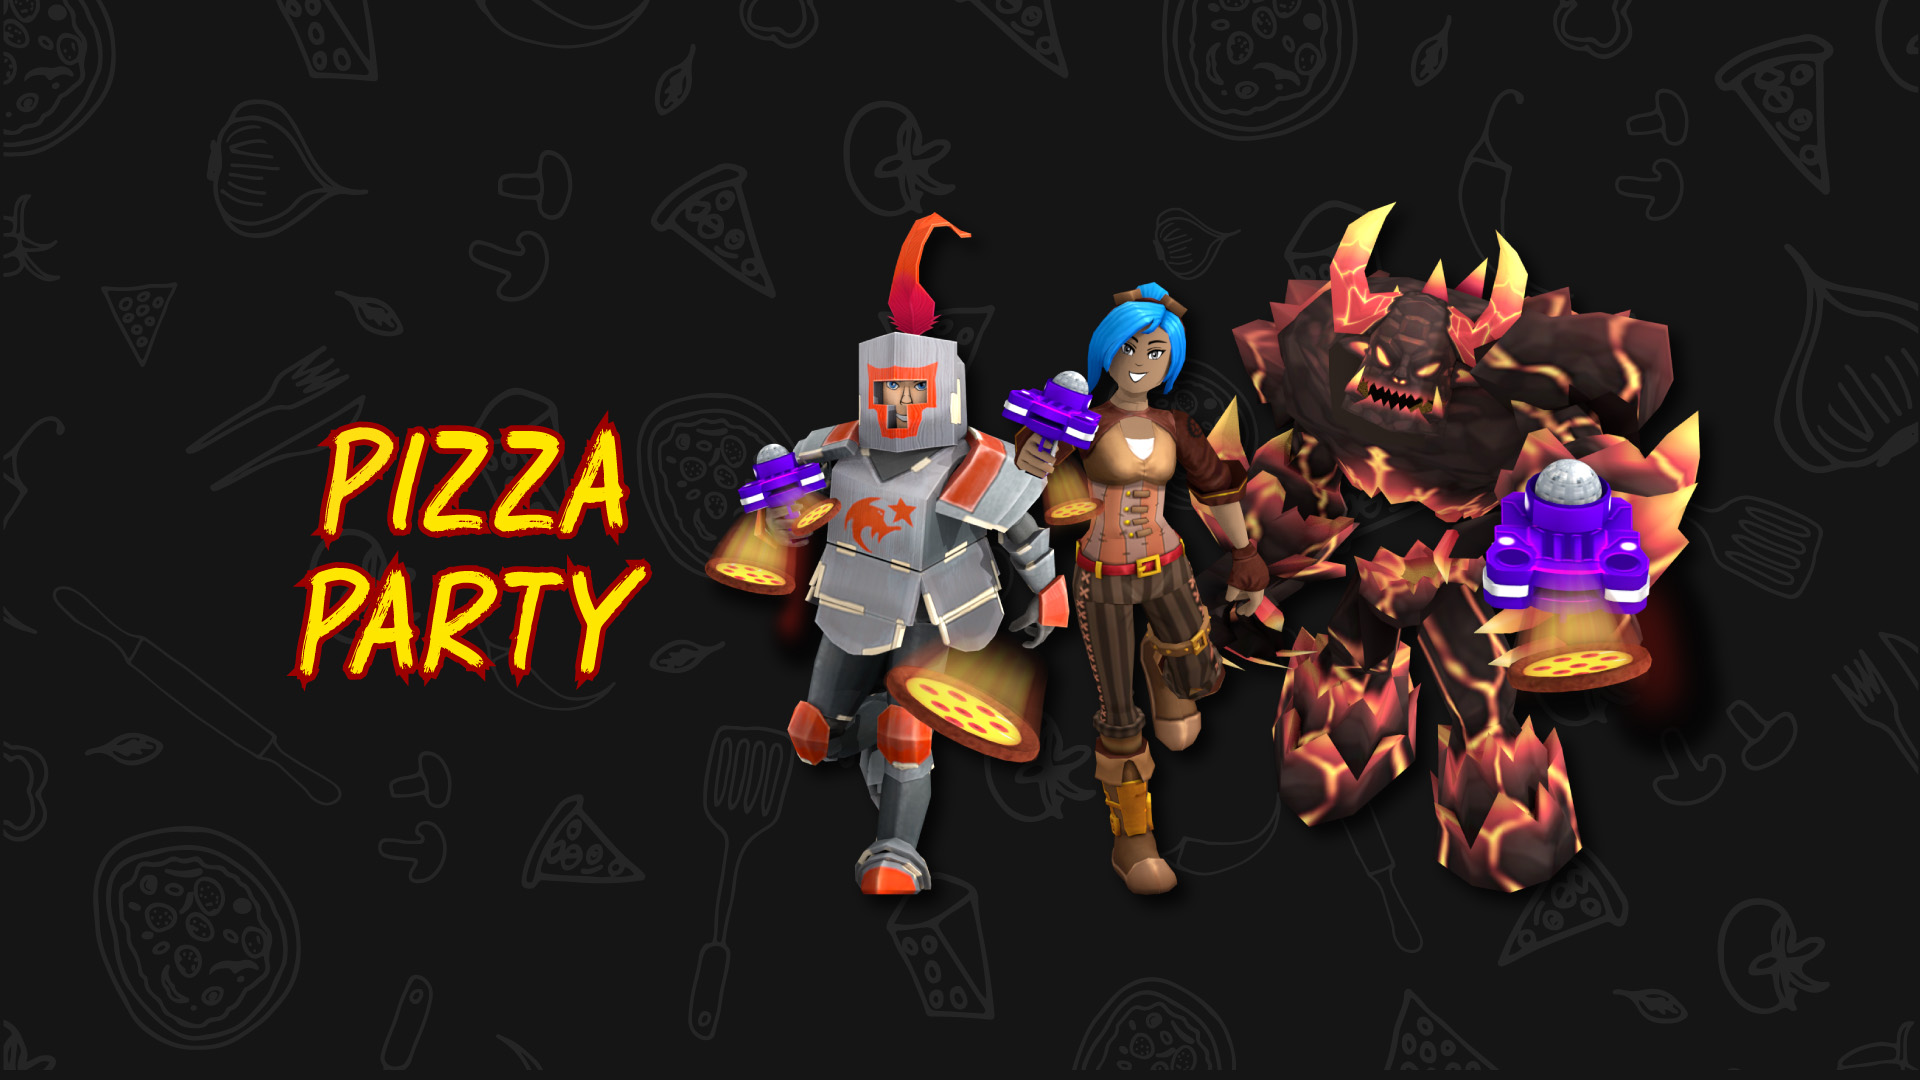 Pizza Party Event Work At A Pizza Place Wiki Fandom - roblox work at a pizza place maze of terror map 2019